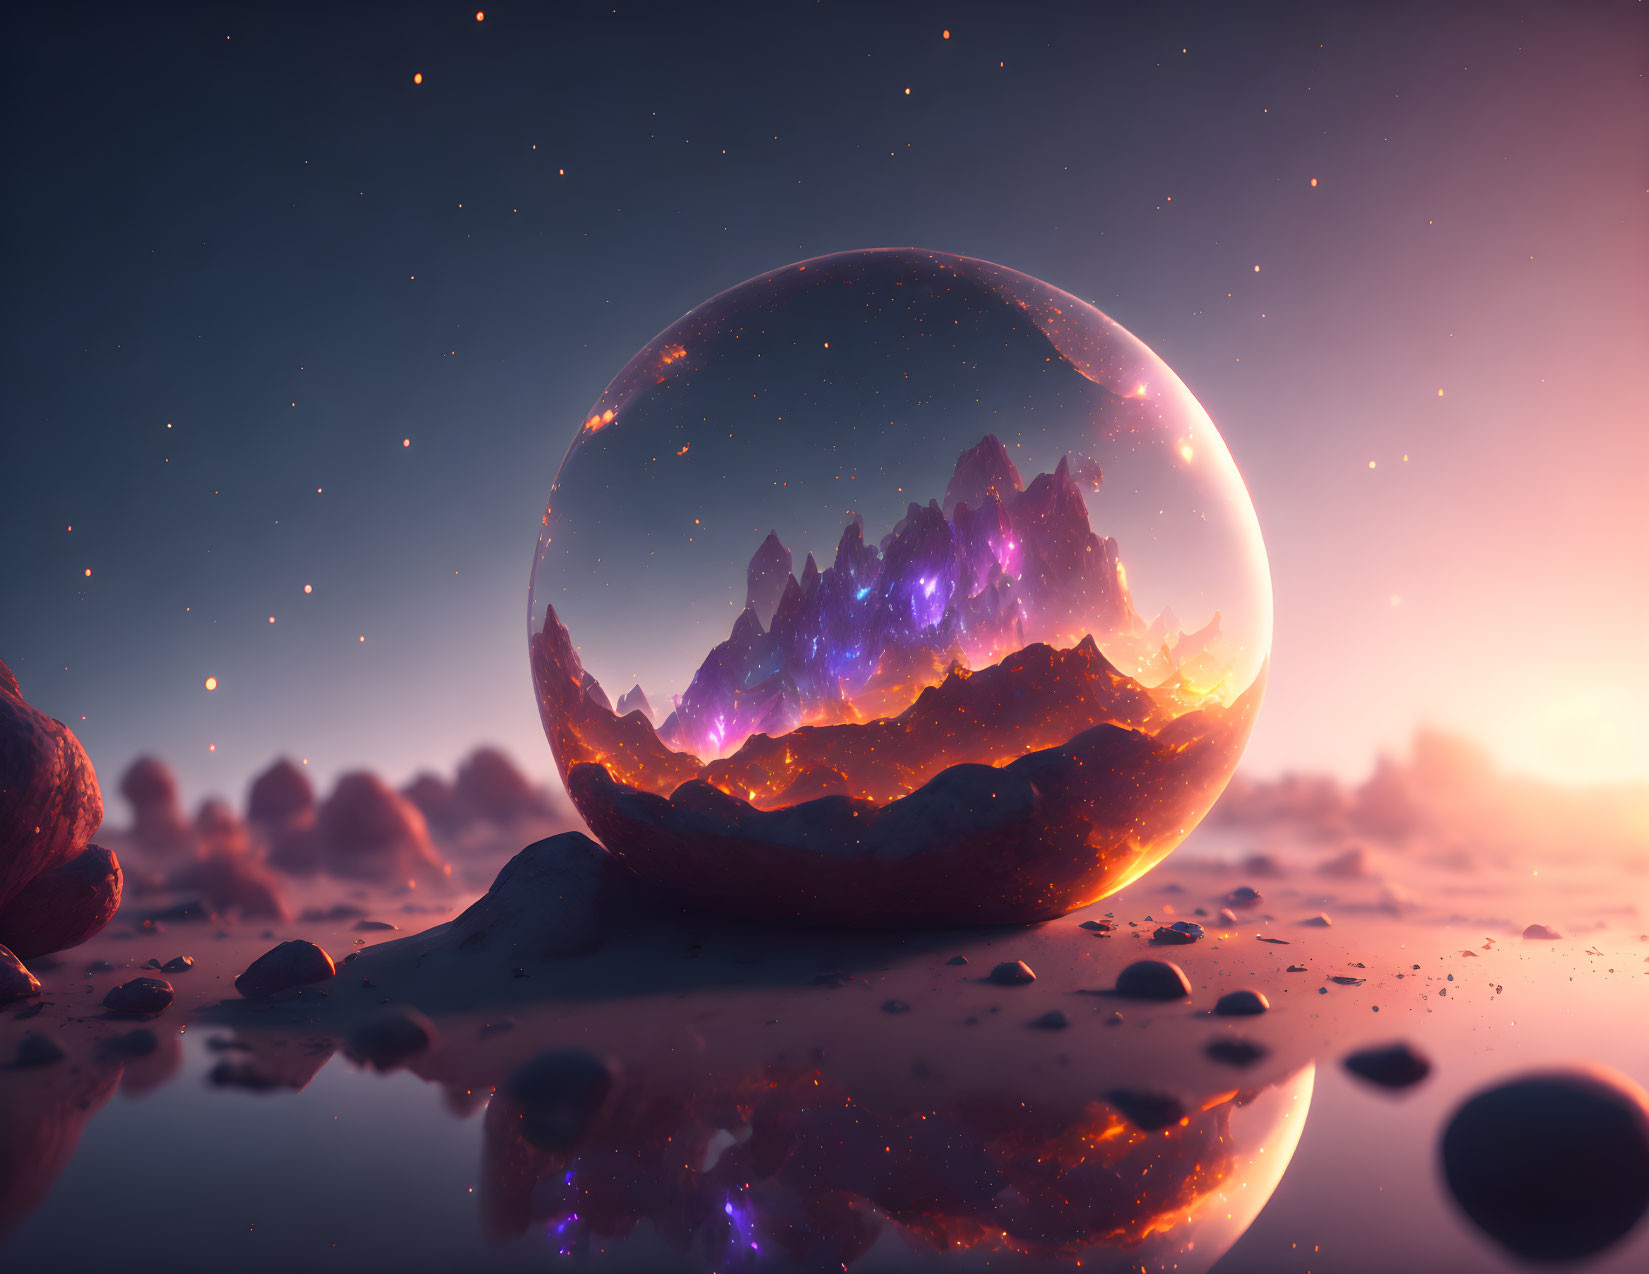 Crystal Ball with Mountain Range in Twilight Landscape and Starry Sky